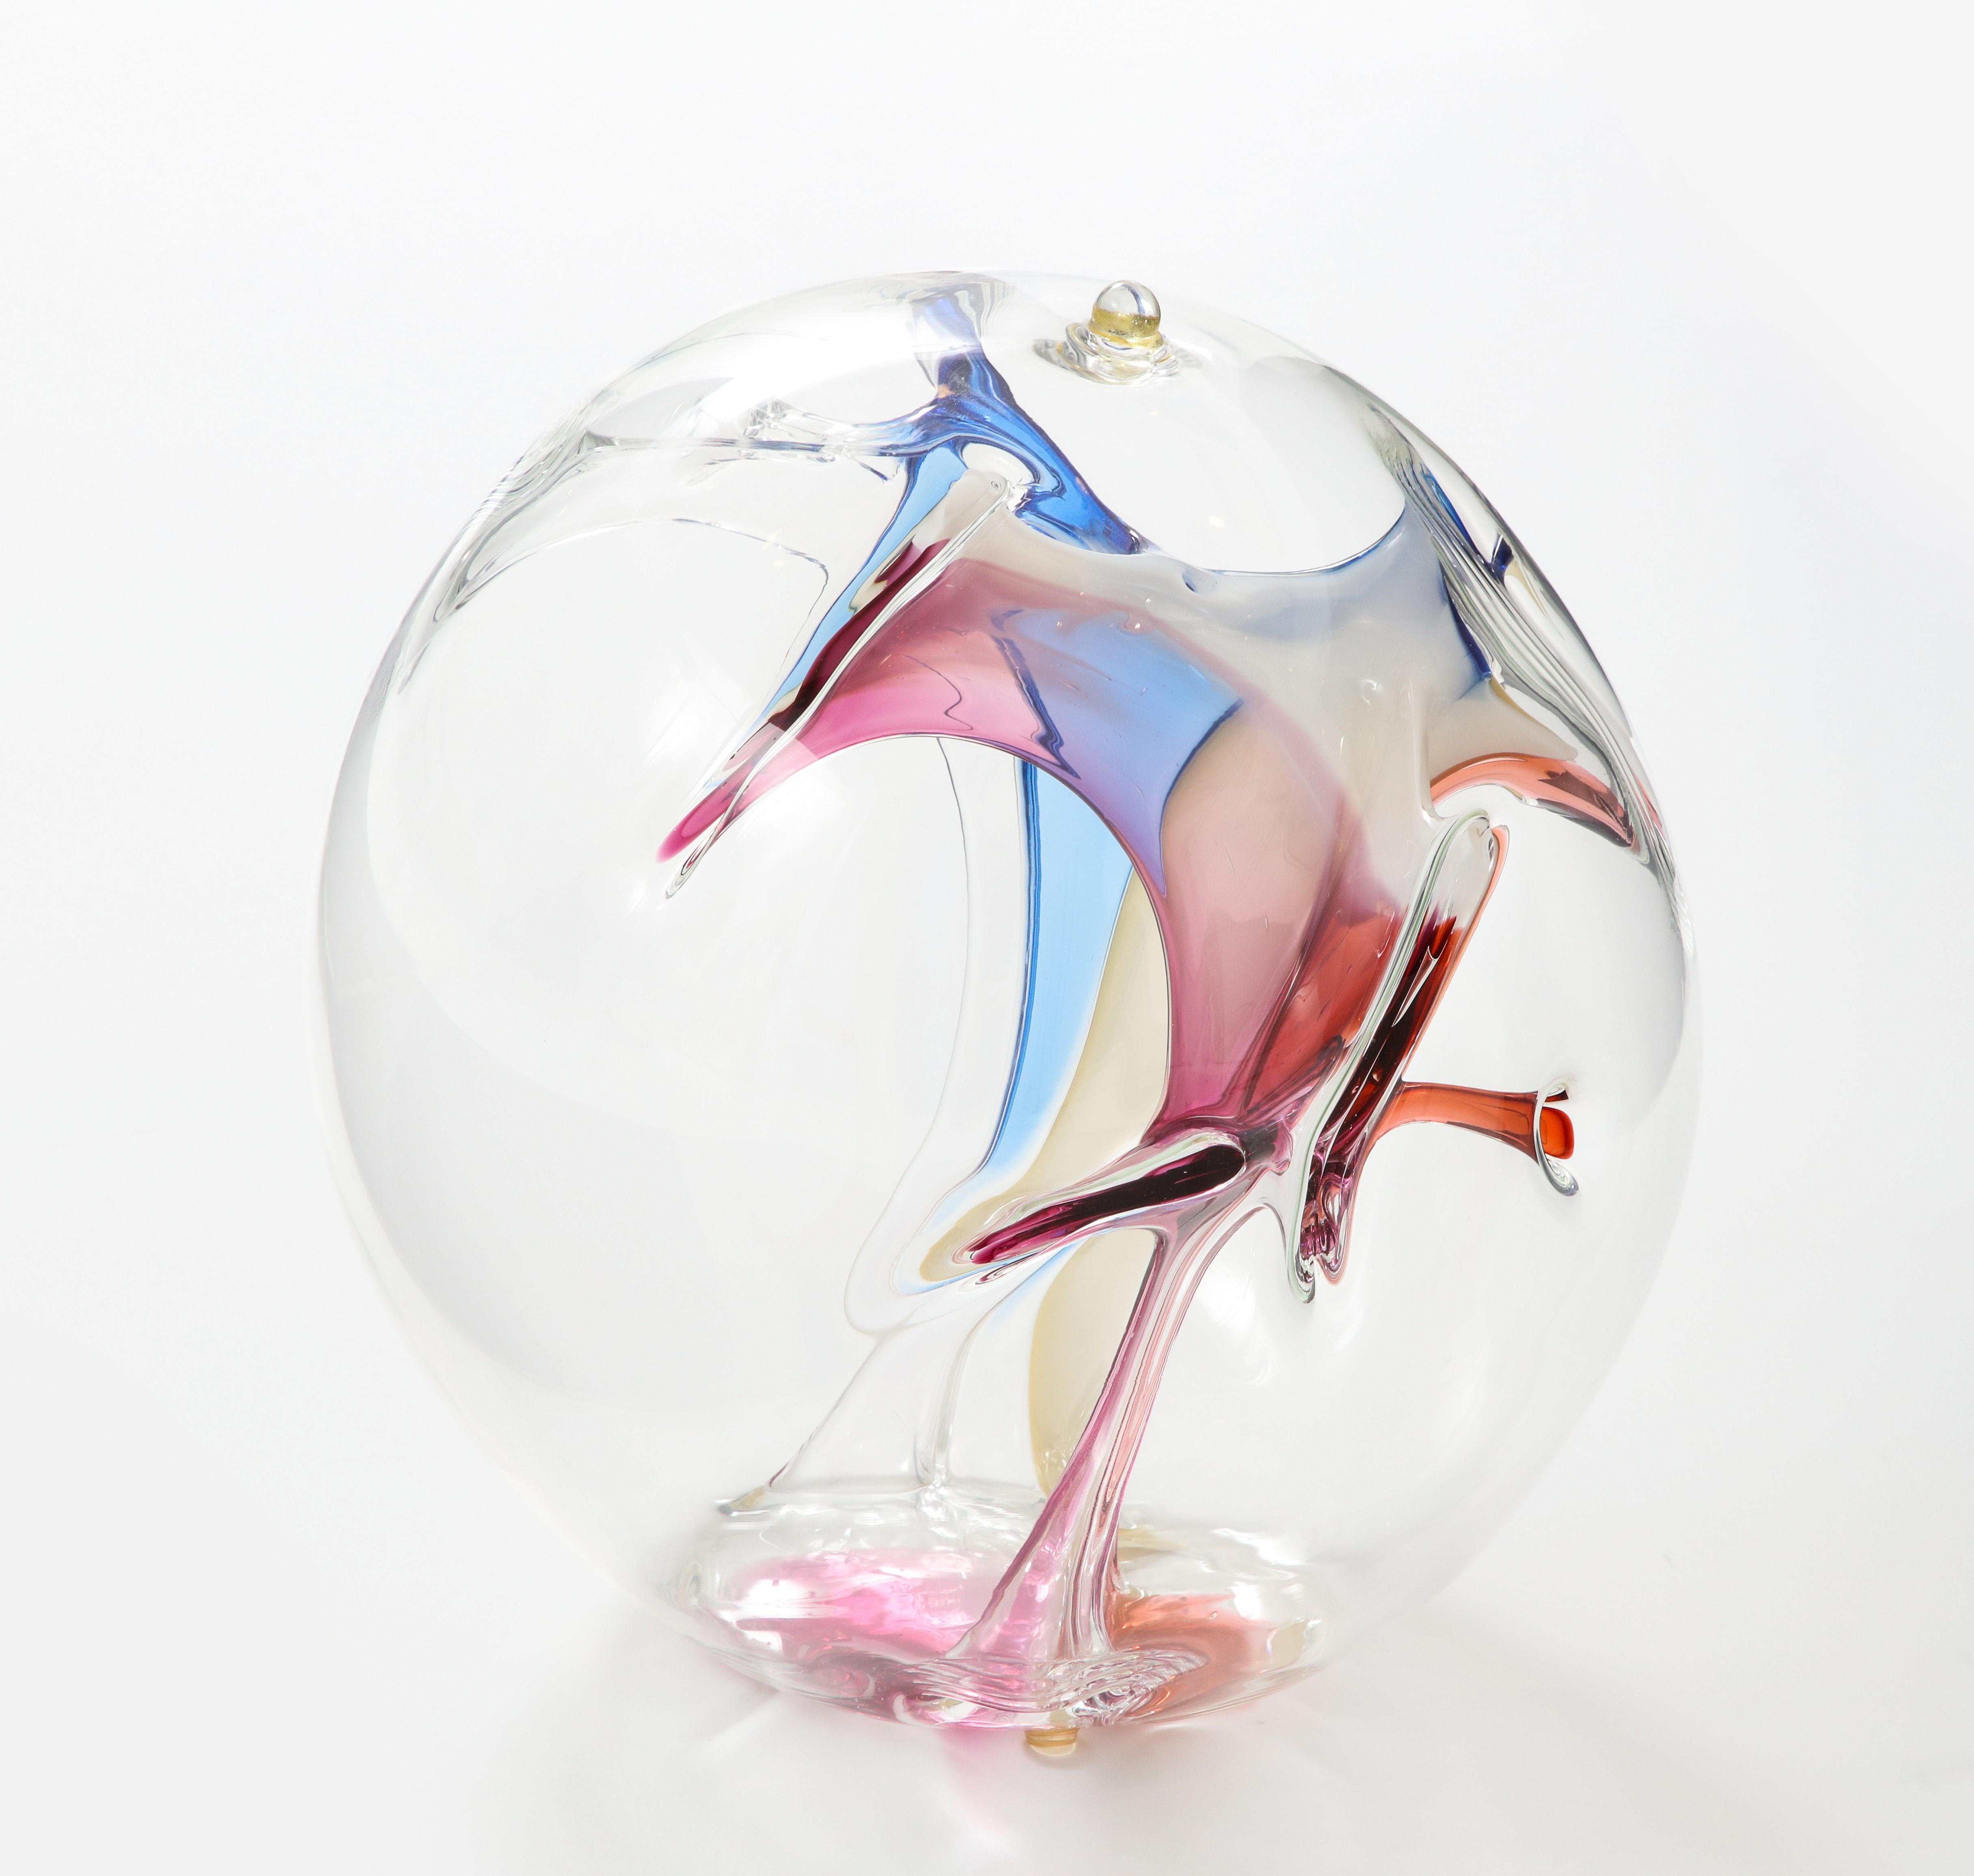 Stunning Glass orb sculpture by Peter Bramhall.
The hand blown glass sculpture has internal glass threads in Blue, Magenta, Clear and champagne tones.
It is signed and dated on the bottom.
